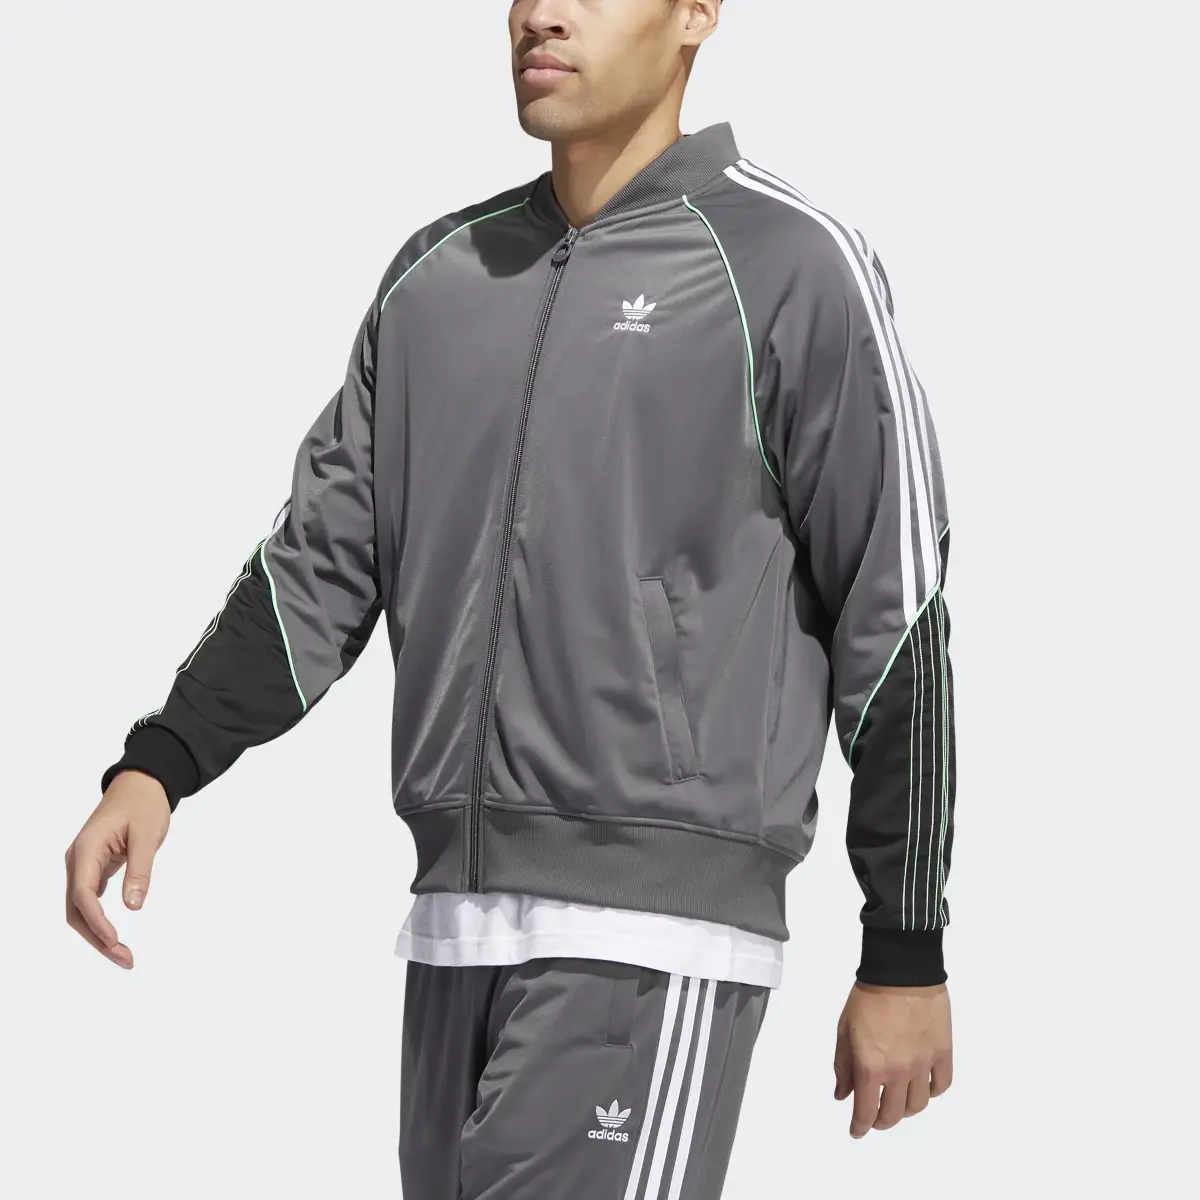 Adidas Tricot SST Track Top. 1